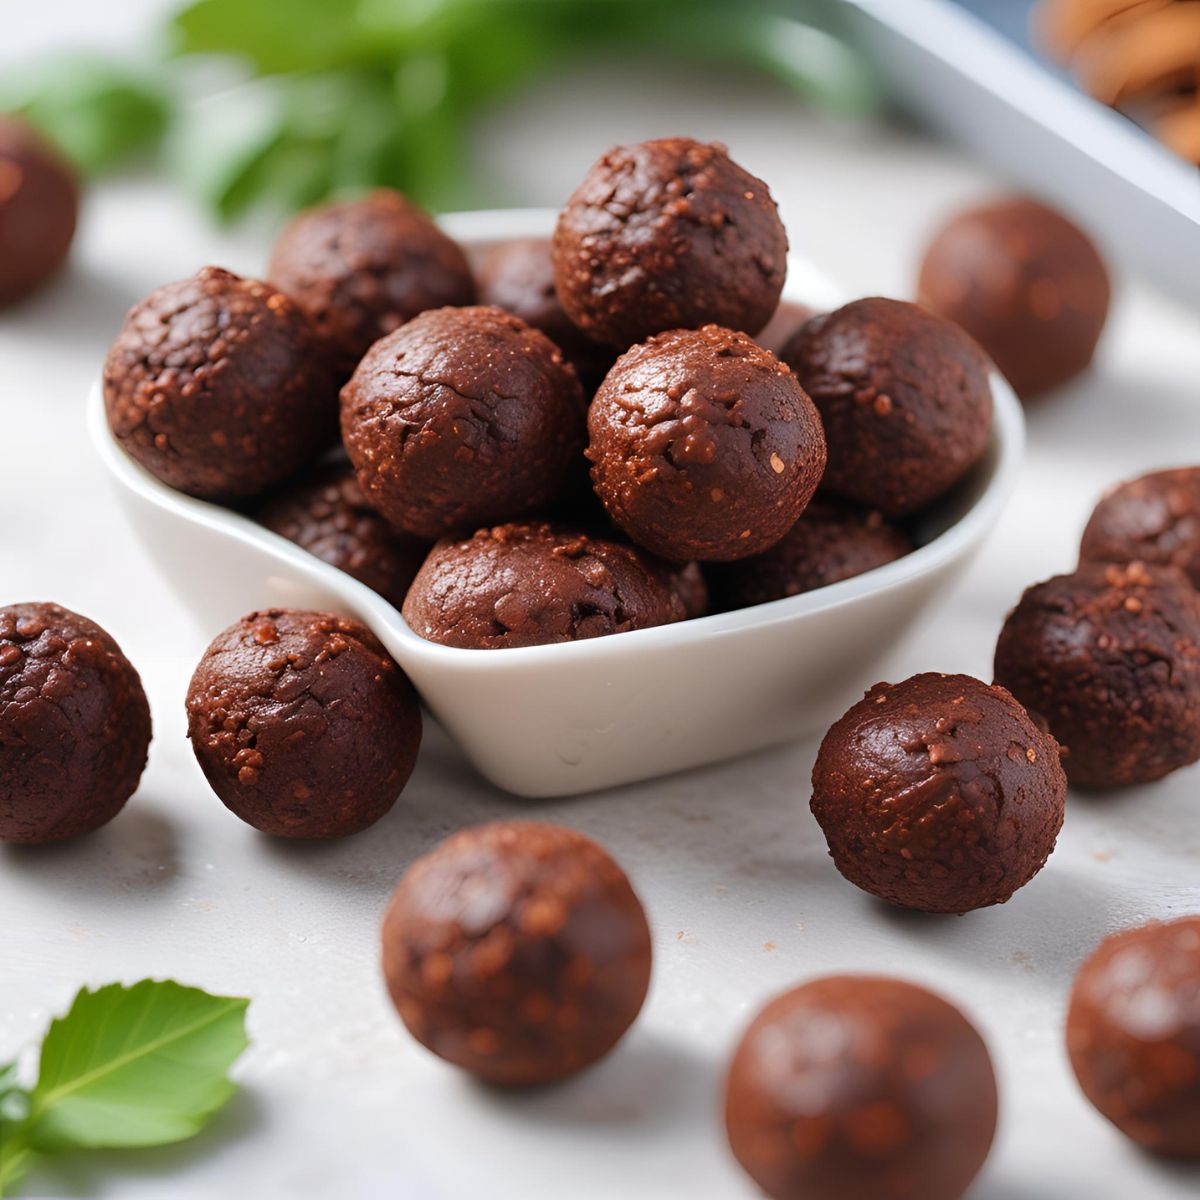 Chocolate Protein Balls Recipe: Delicious and Nutritious!